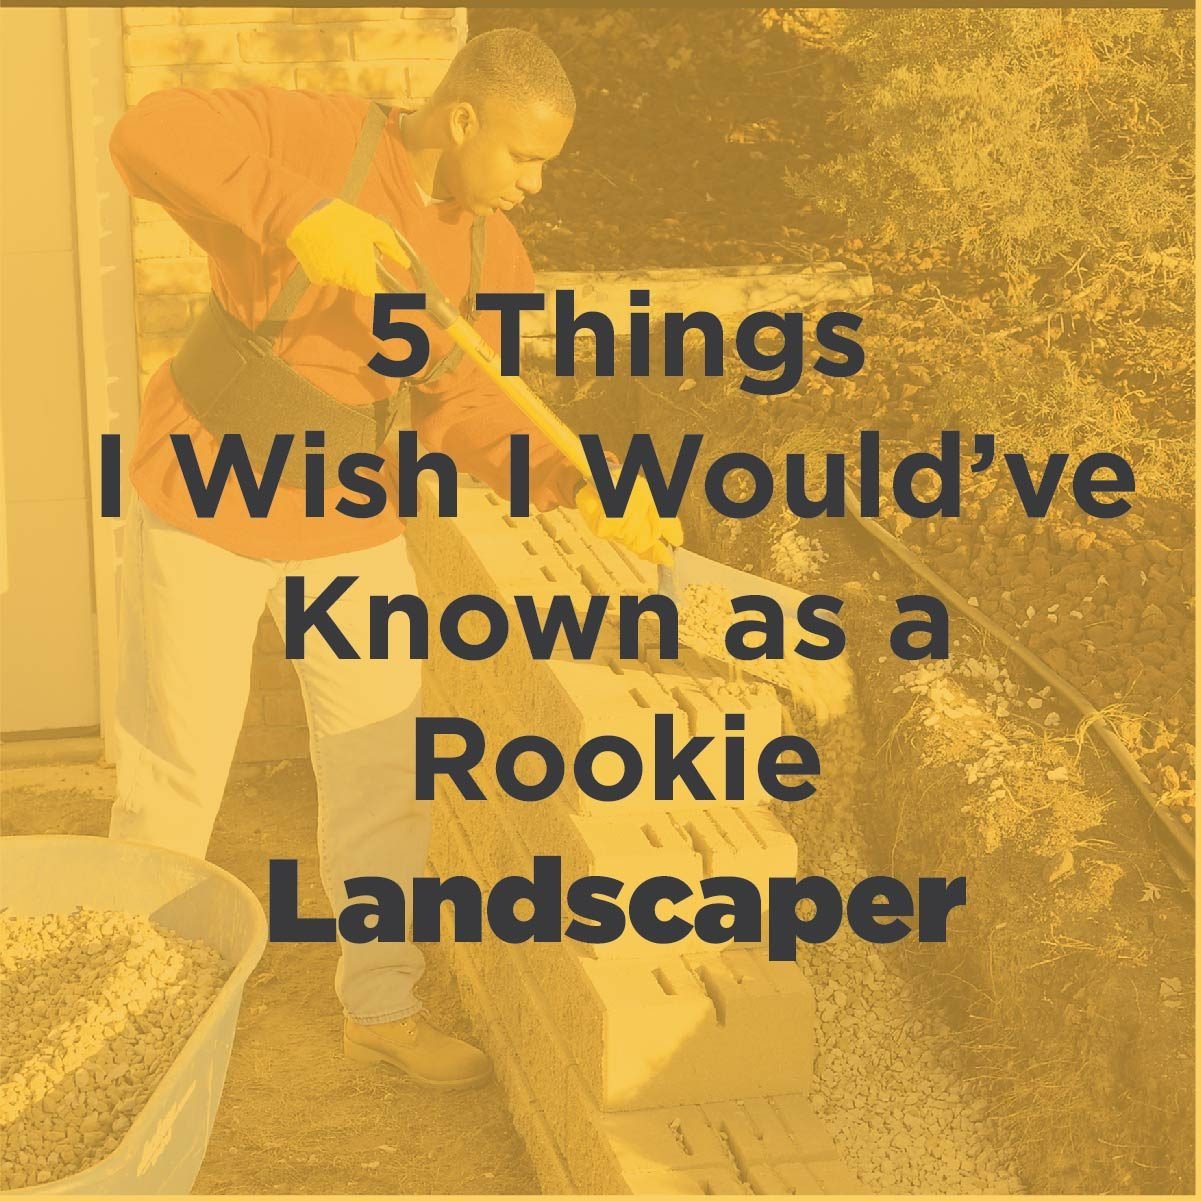 5 Things I Wish I Would've Known as a Rookie Landscaper